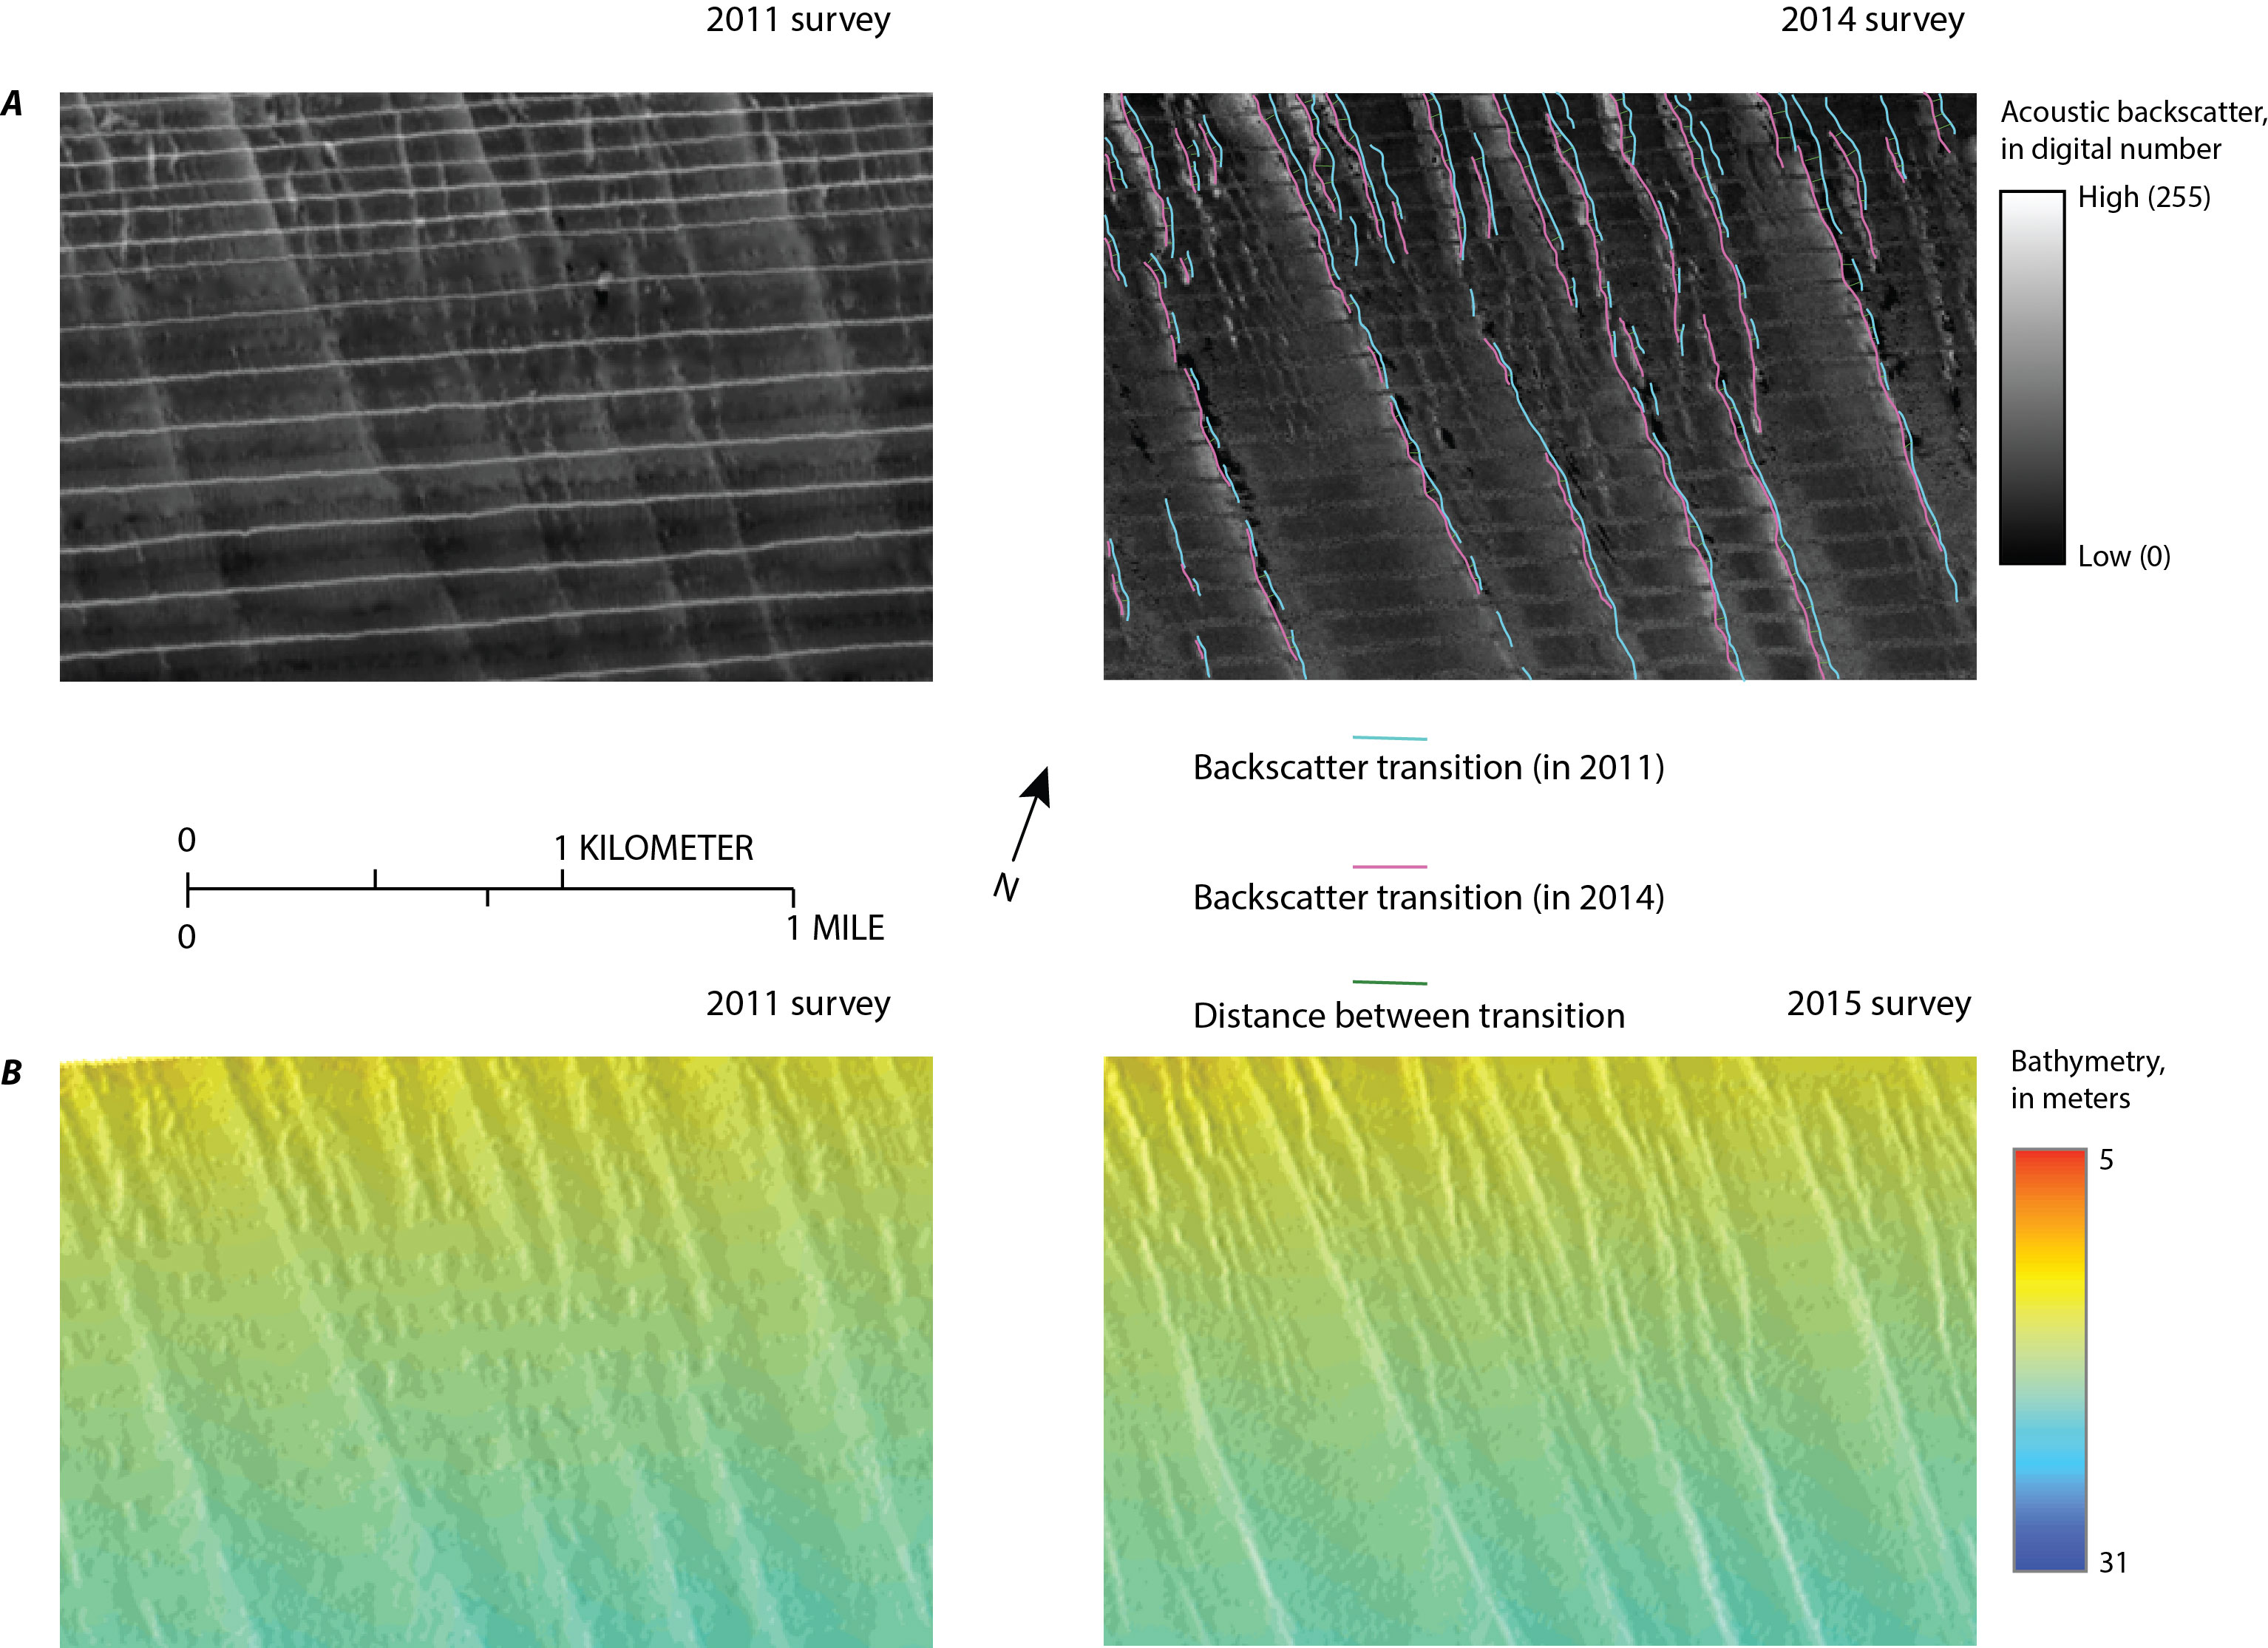 Map showing backscatter and bathymetry collected in 2011 and 2014 offshore of Fire Island, New York. Sharp transitions between high and low backscatter identified along the margins of discrete sediment distribution patterns and sedimentary structures form the 2011 and 2014 surveys are overlain on the backscatter data from the 2014 survey.